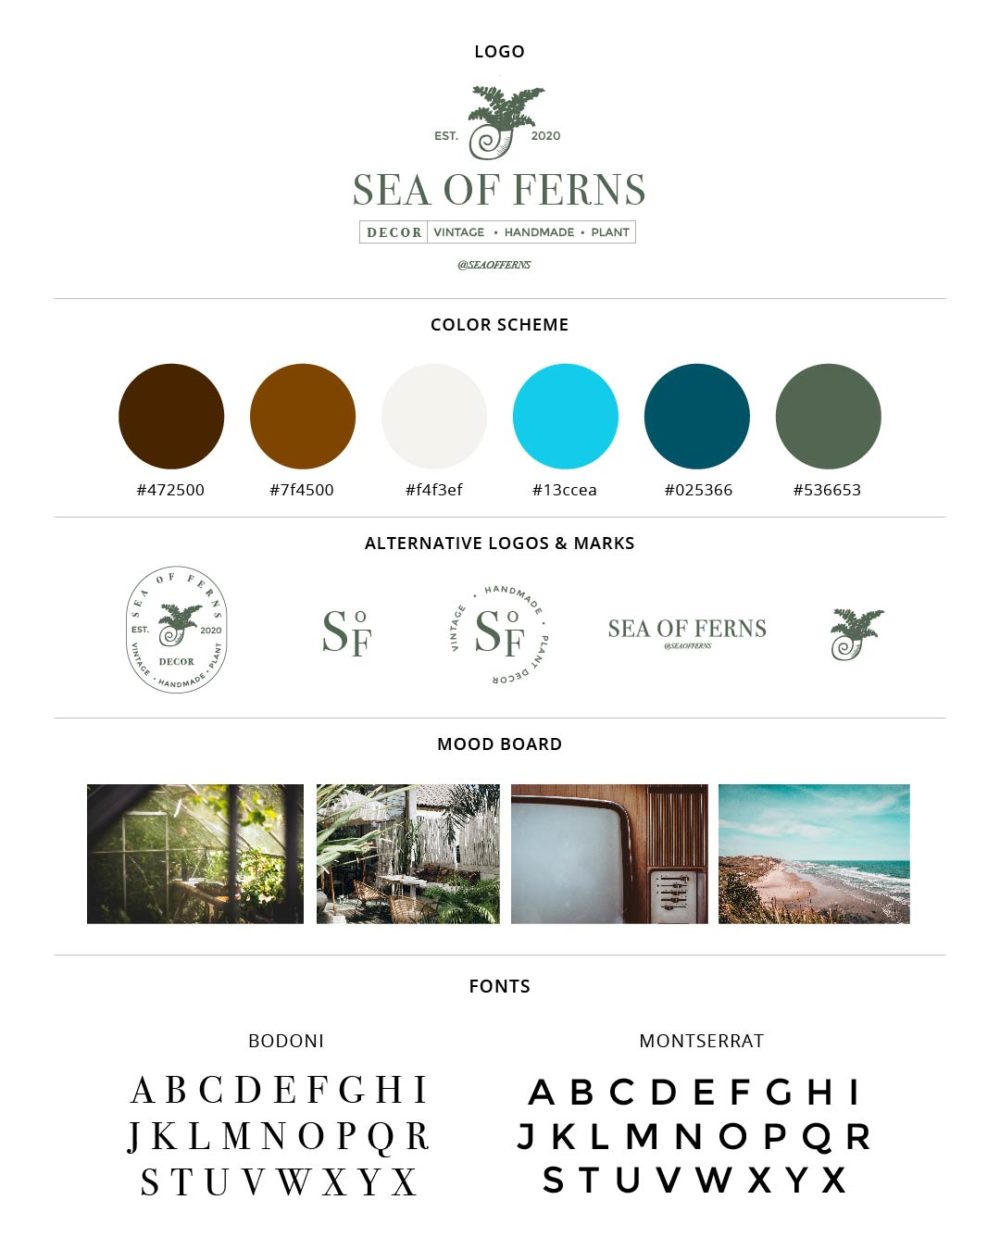 Sea Of Ferns Brand Guide with logo options, fonts, color scheme, and mood board